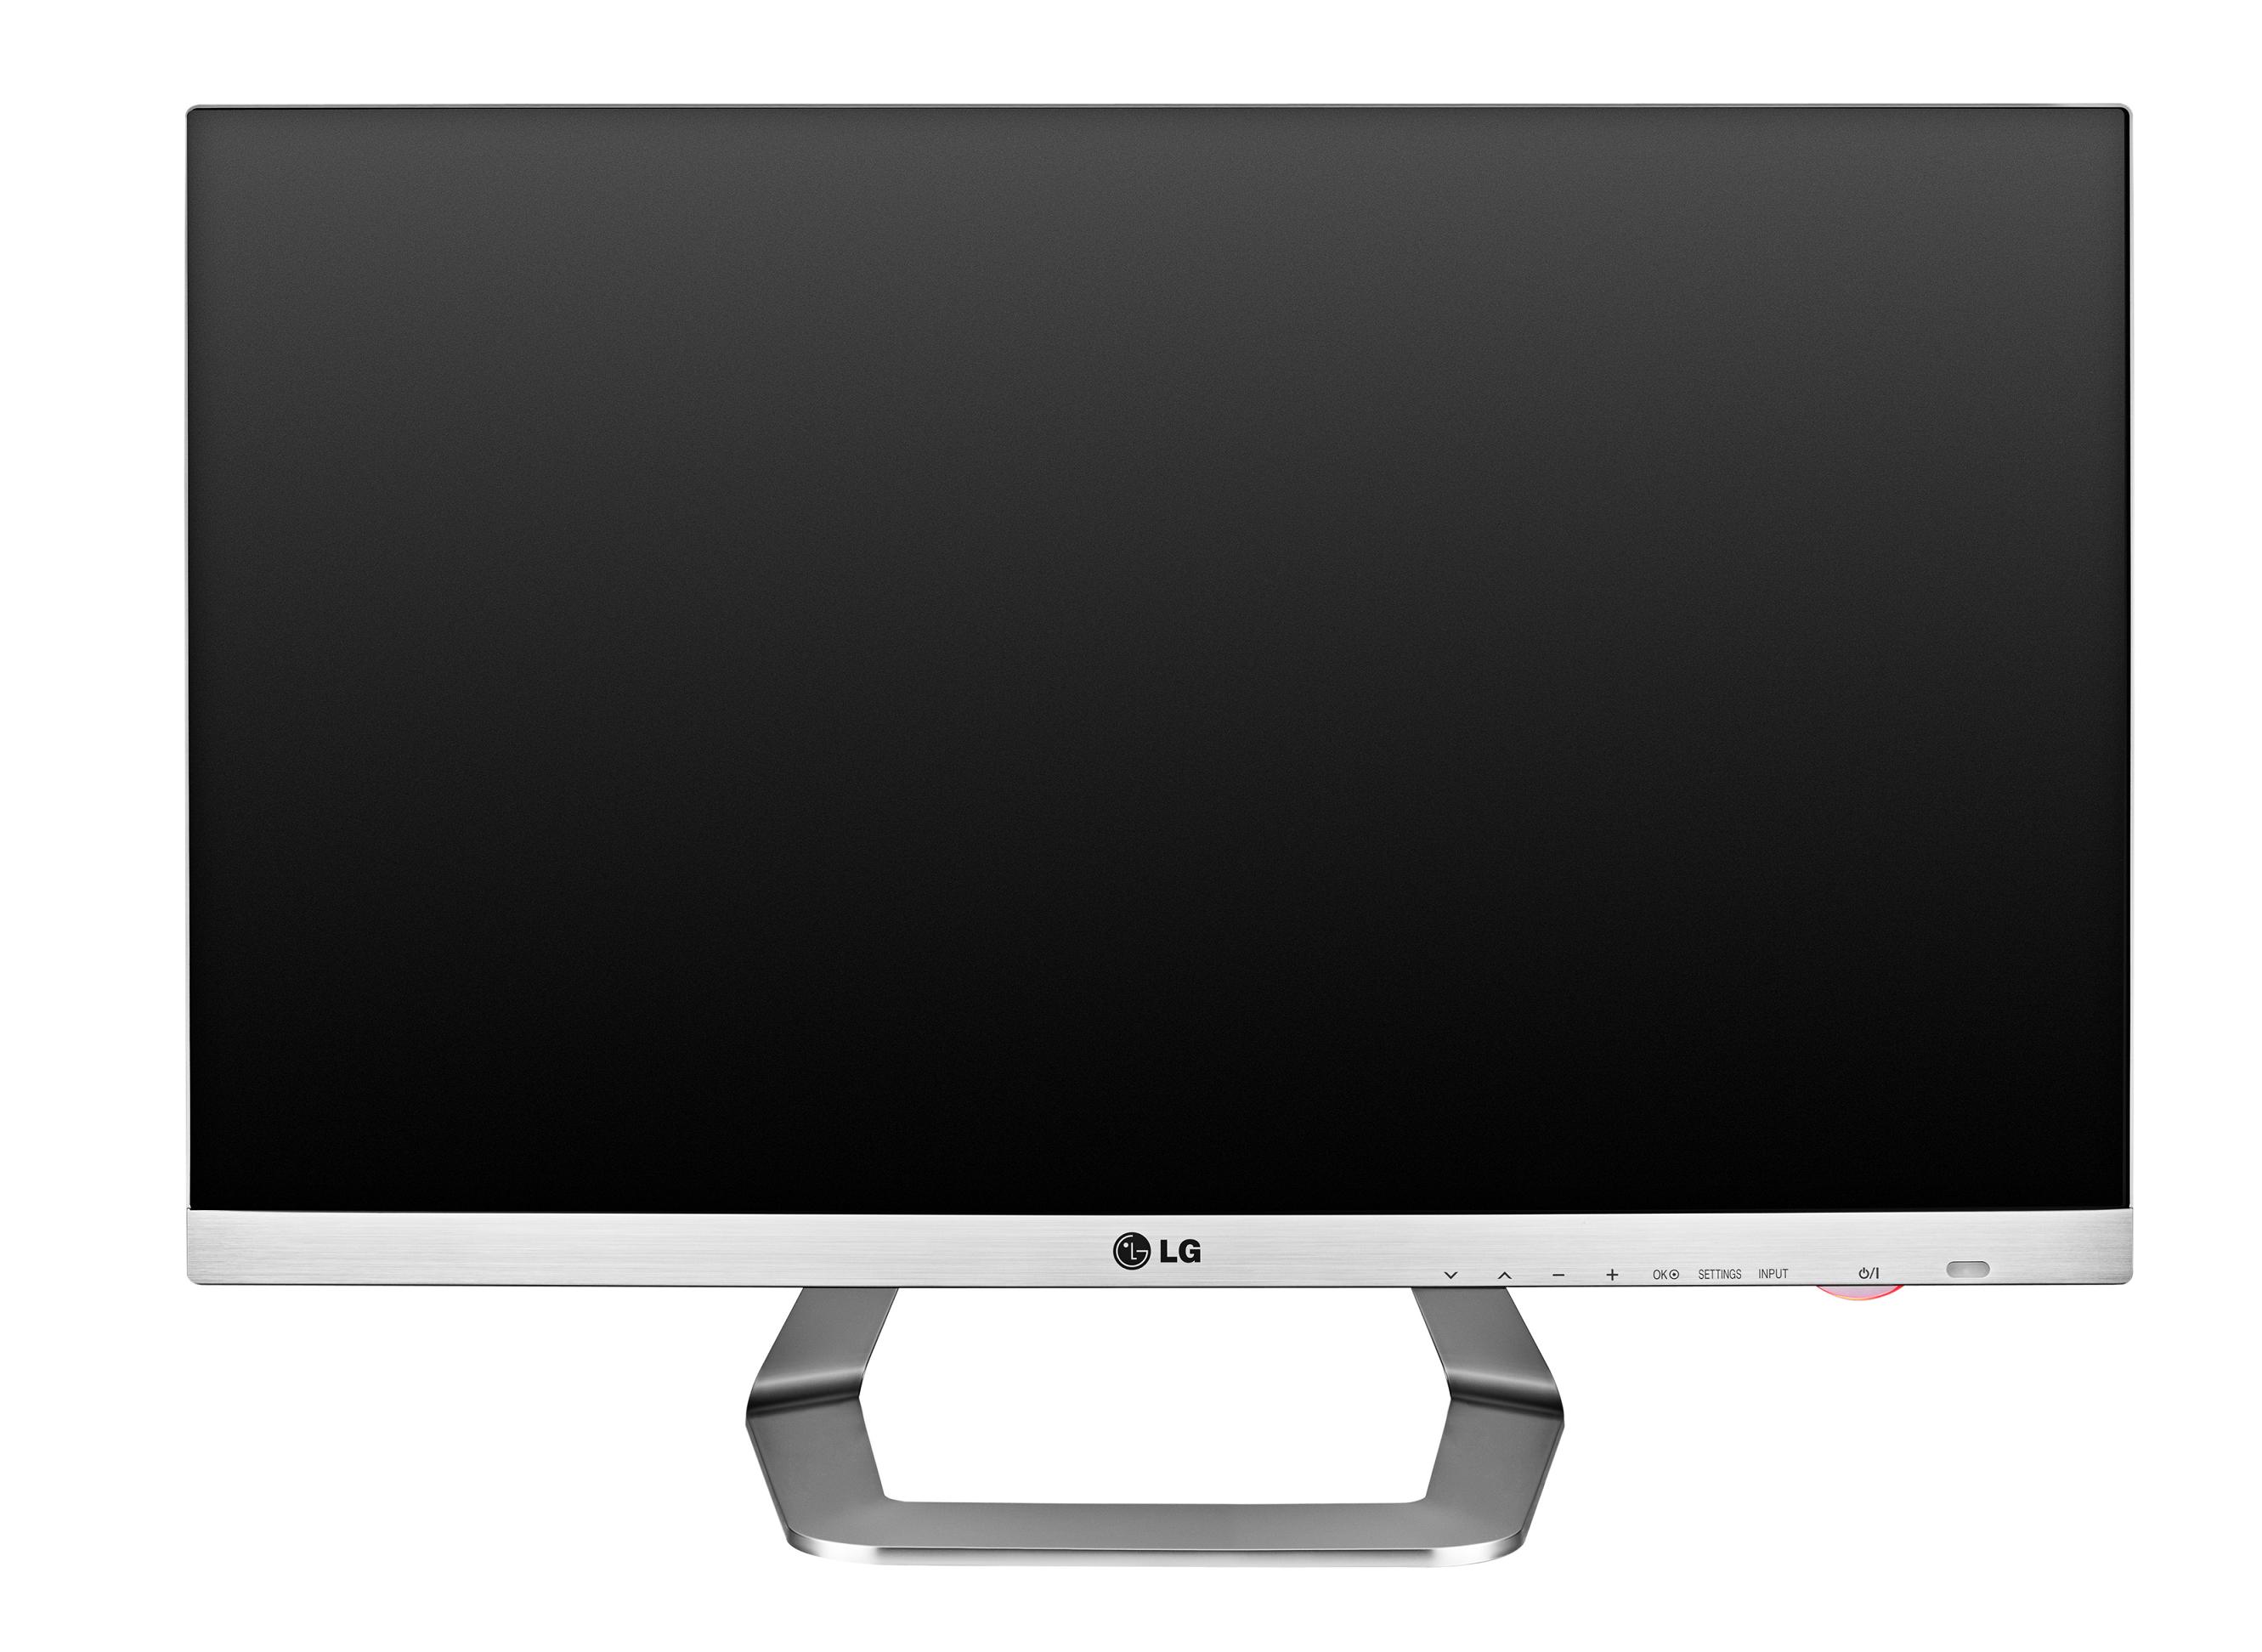 Front view of LG Personal Smart TV model TM2792